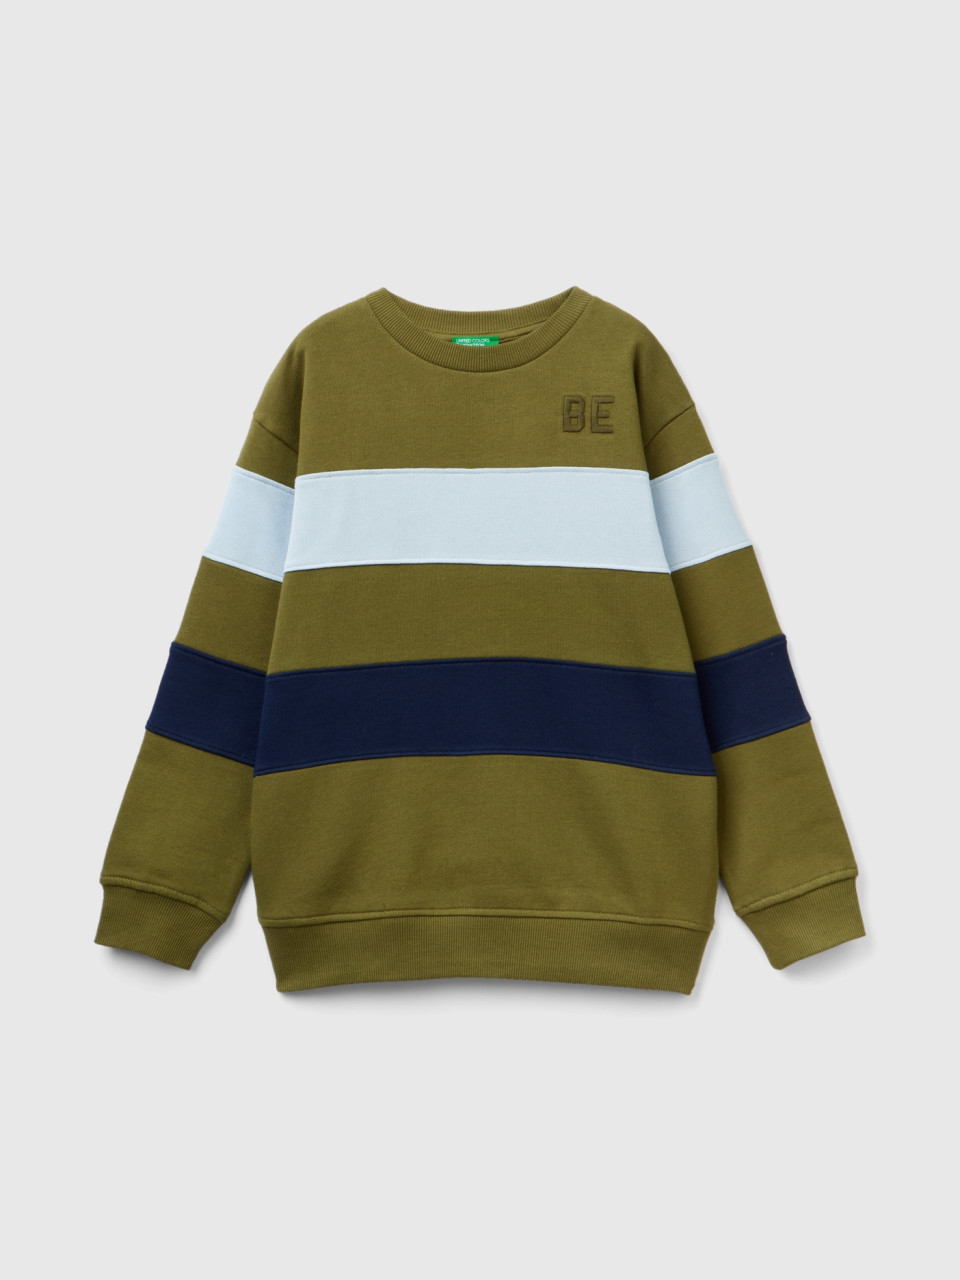 Benetton, Striped Sweatshirt With be Embroidery, Military Green, Kids